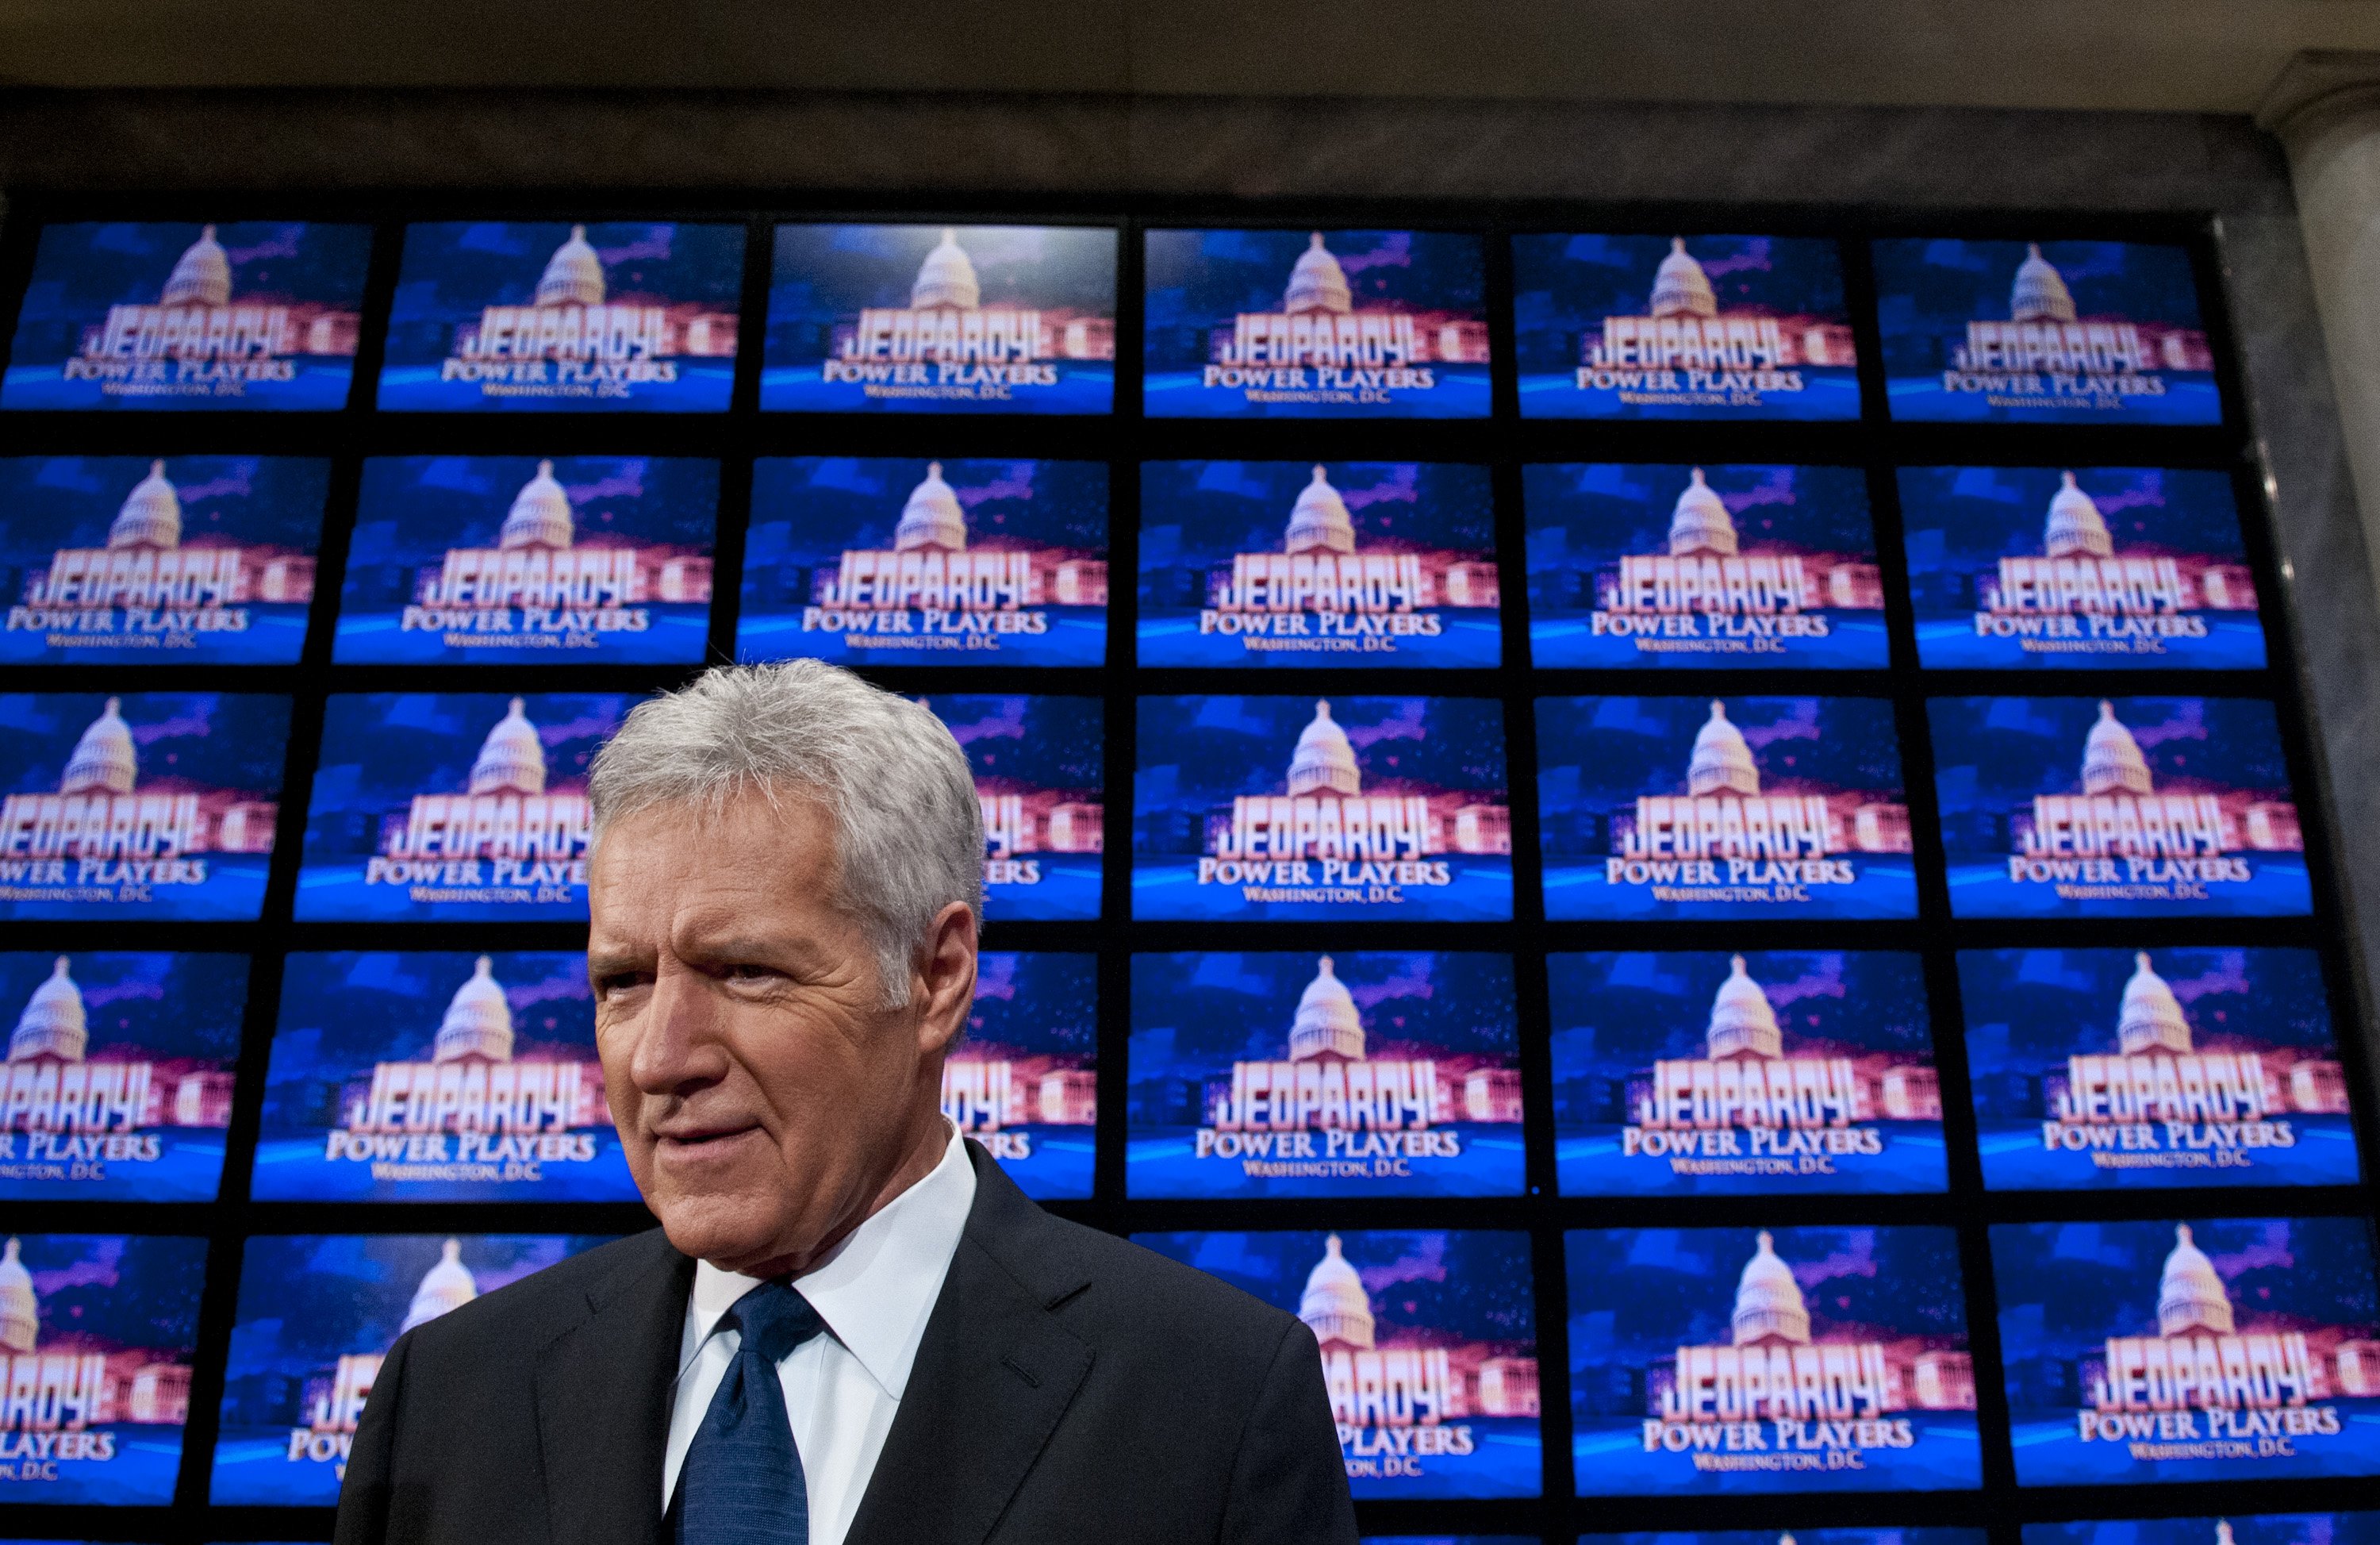 Alex Trebek speaks before taping "Jeopardy" in Washington, DC on April 21, 2012 | Photo: Getty Images